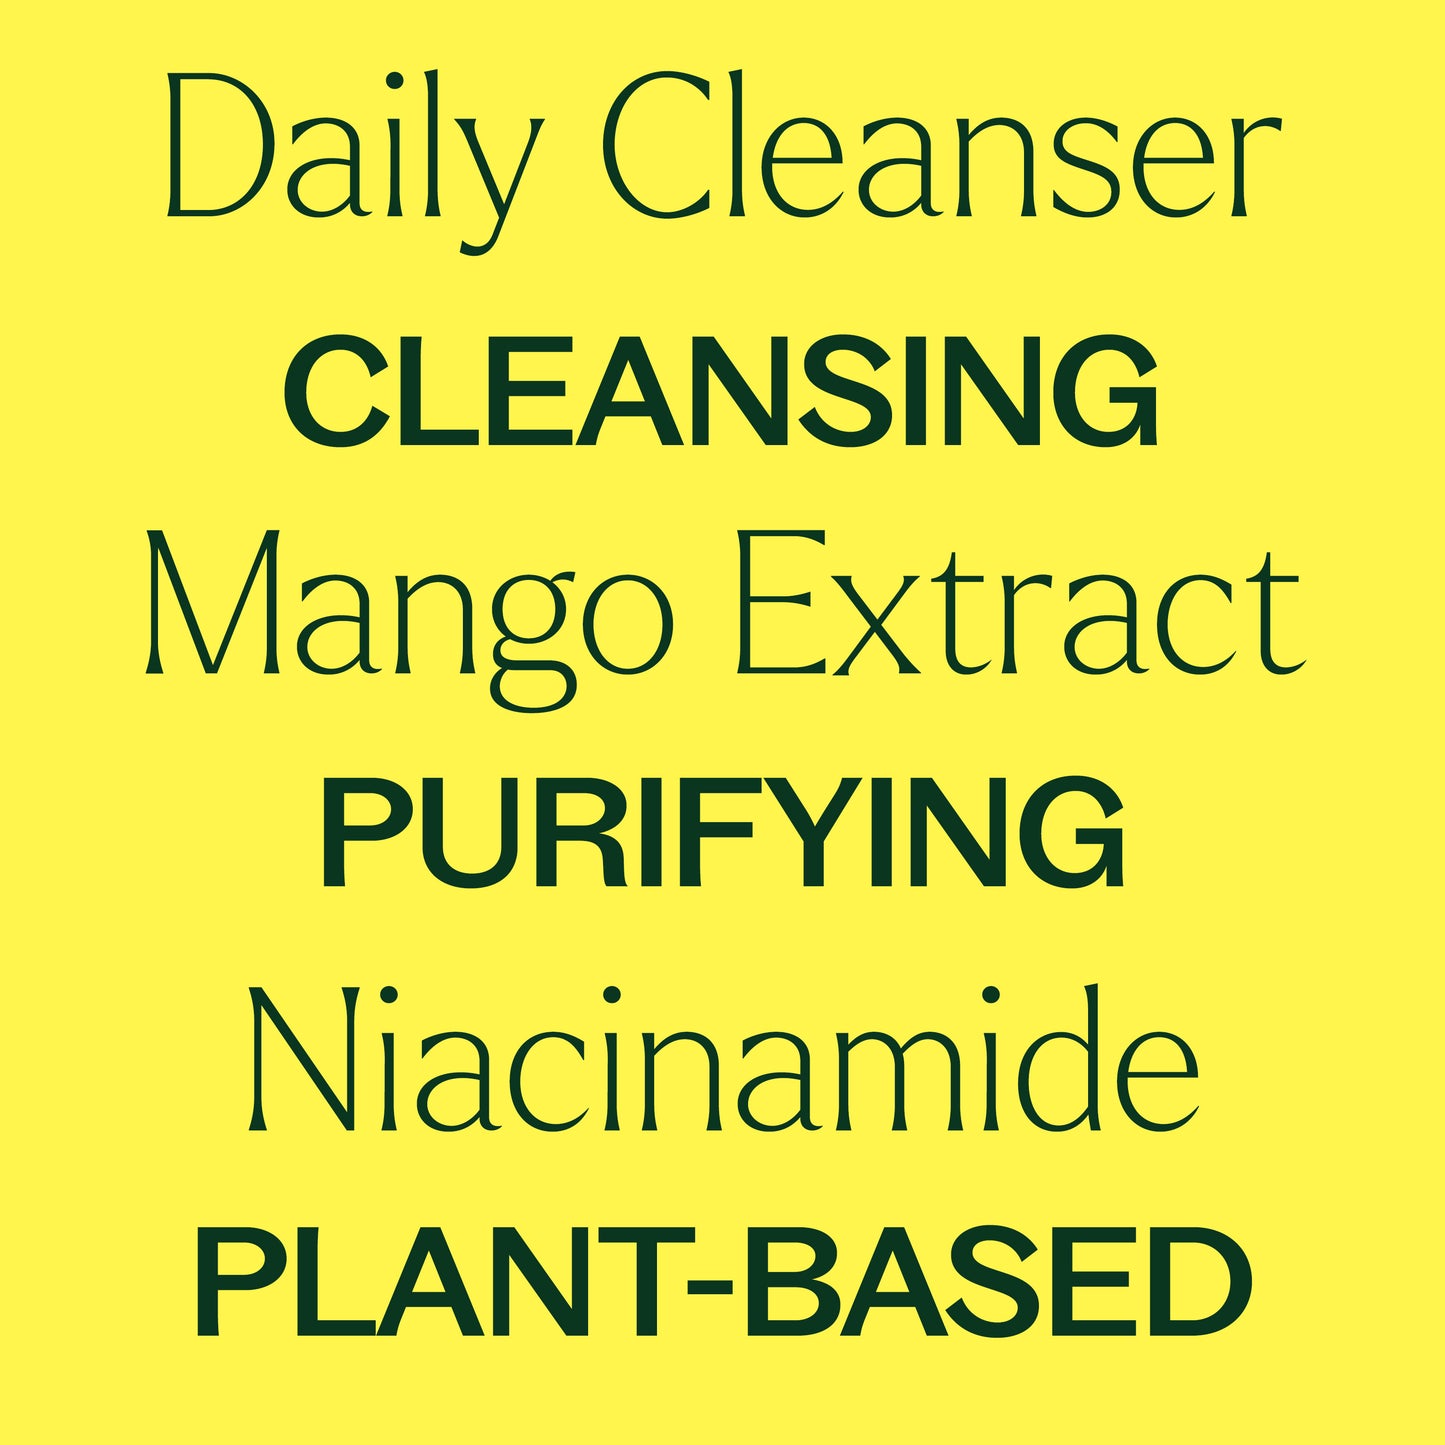 Daily cleanser, mango extract, niacinamide. cleansing, purifying, plant-based